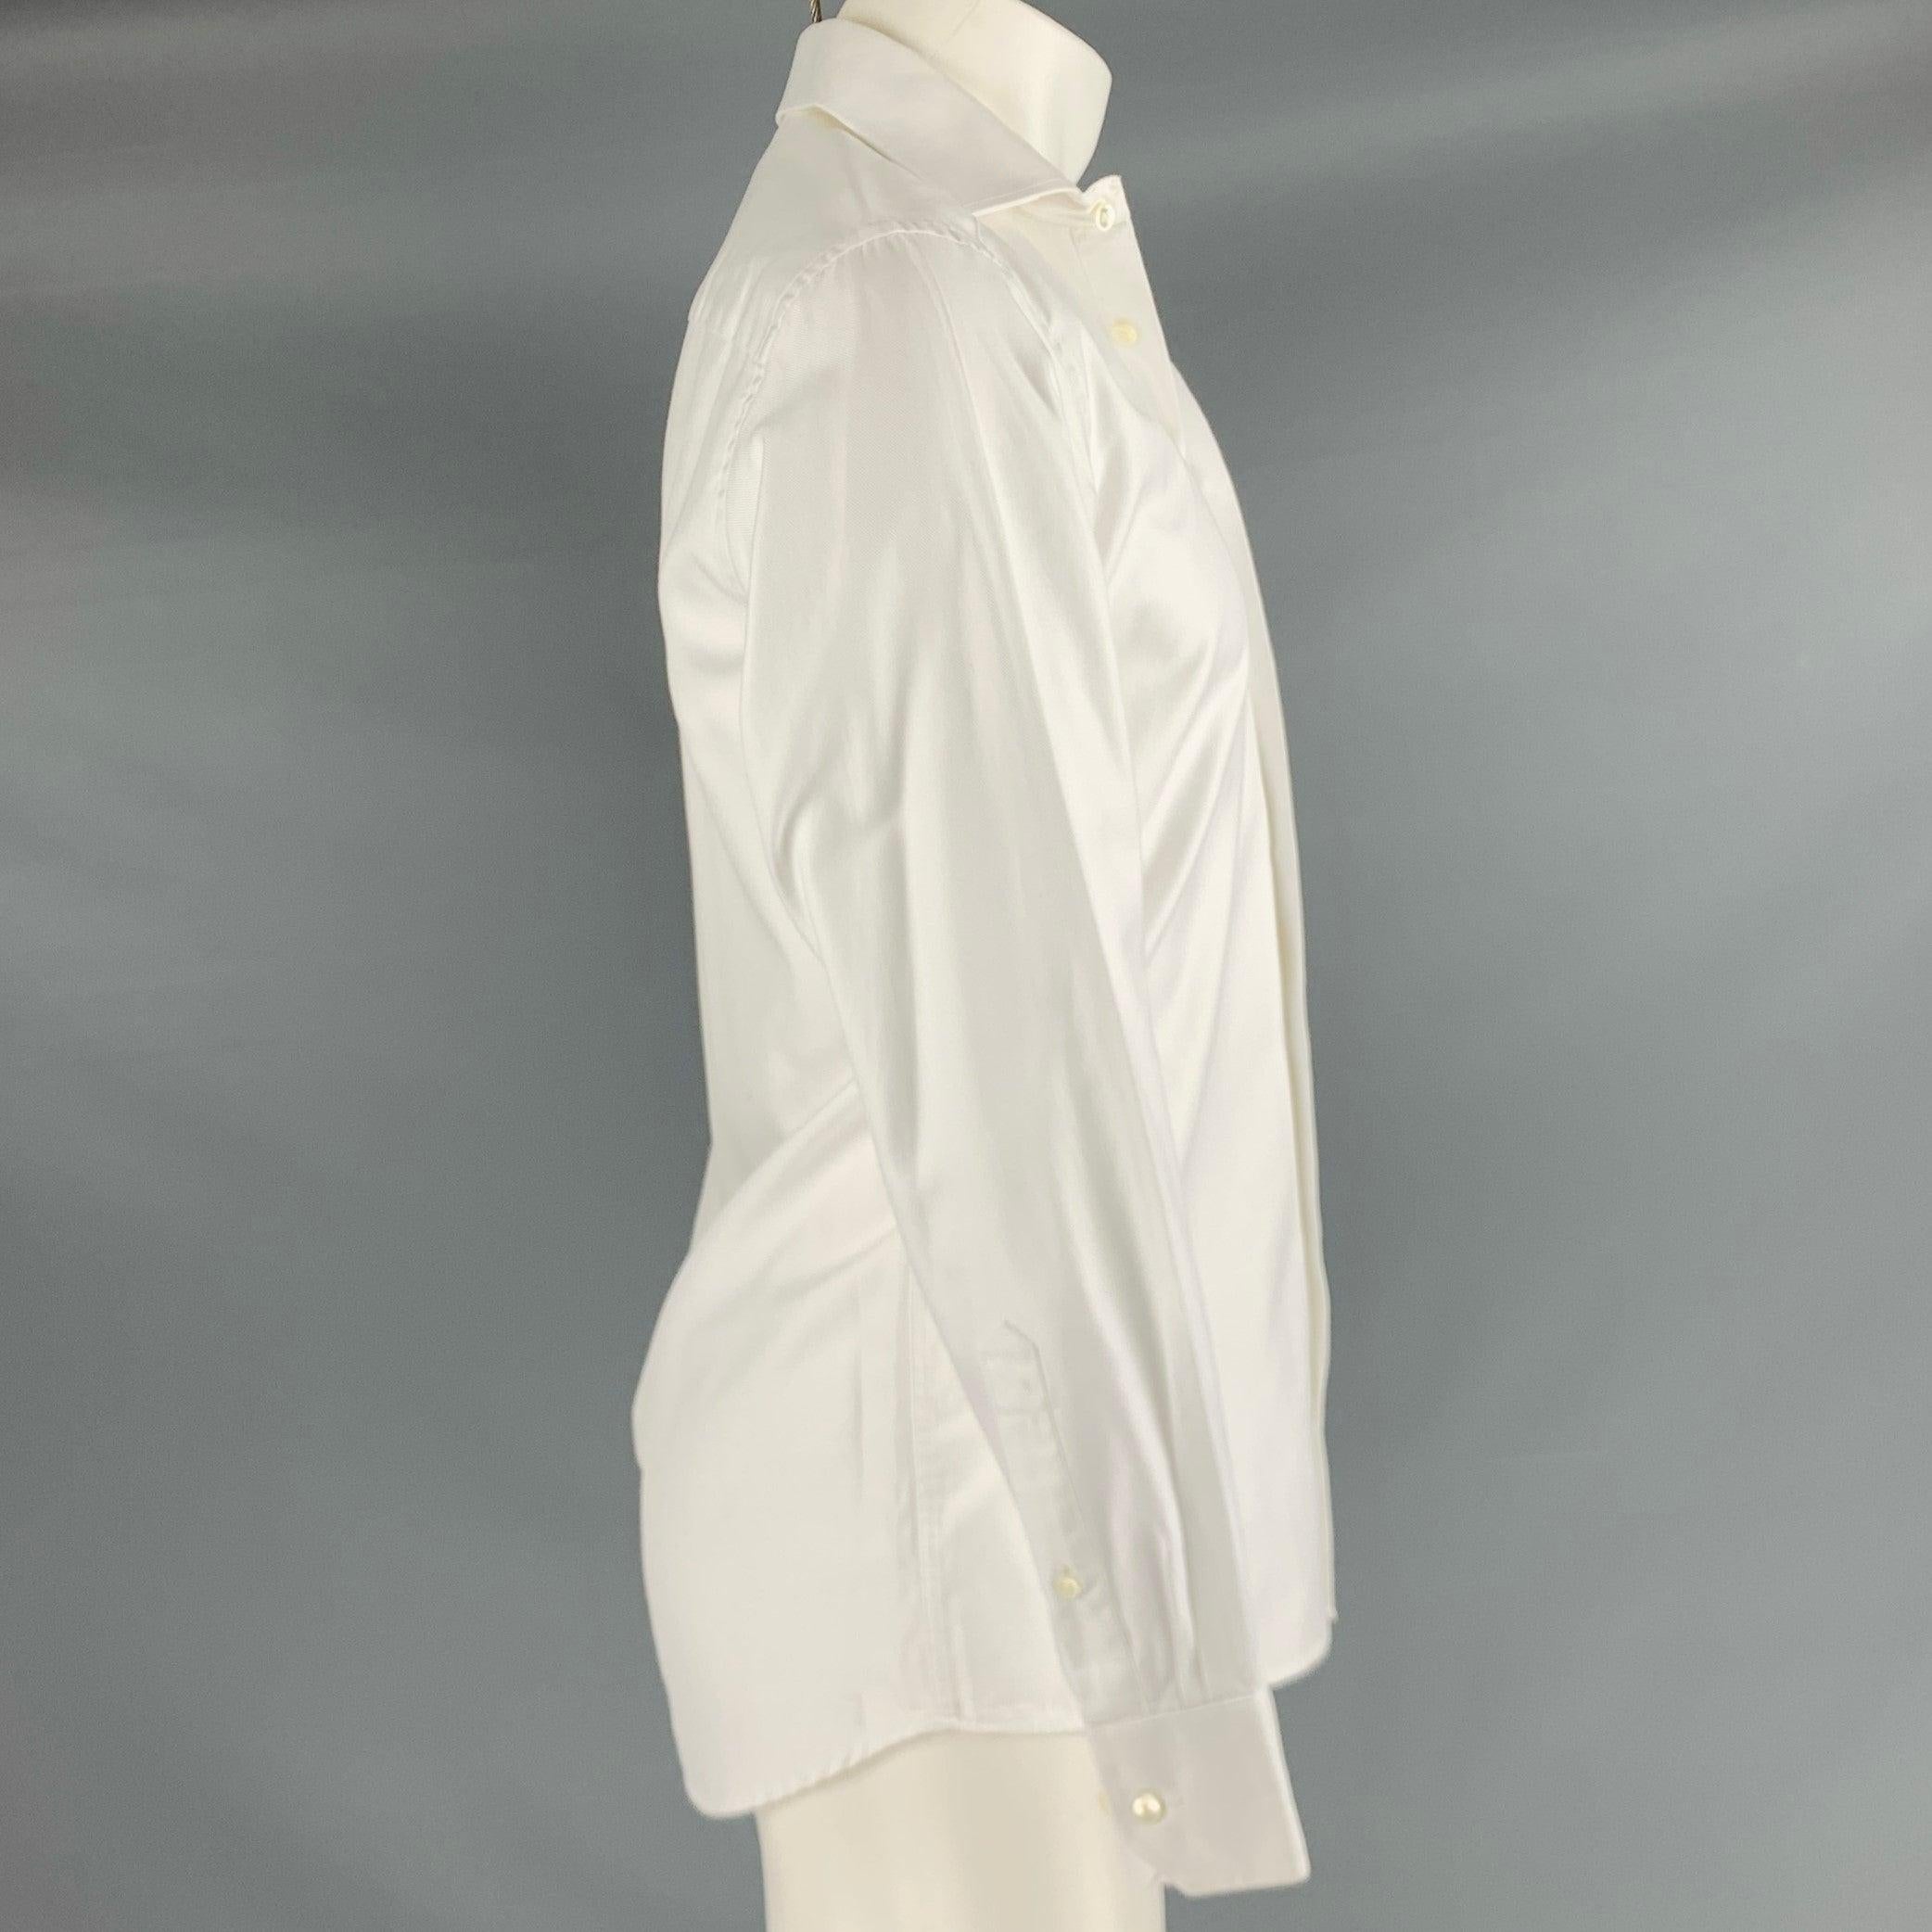 HARDY AMIES long sleeve shirt
in a white cotton twill fabric featuring a formal 